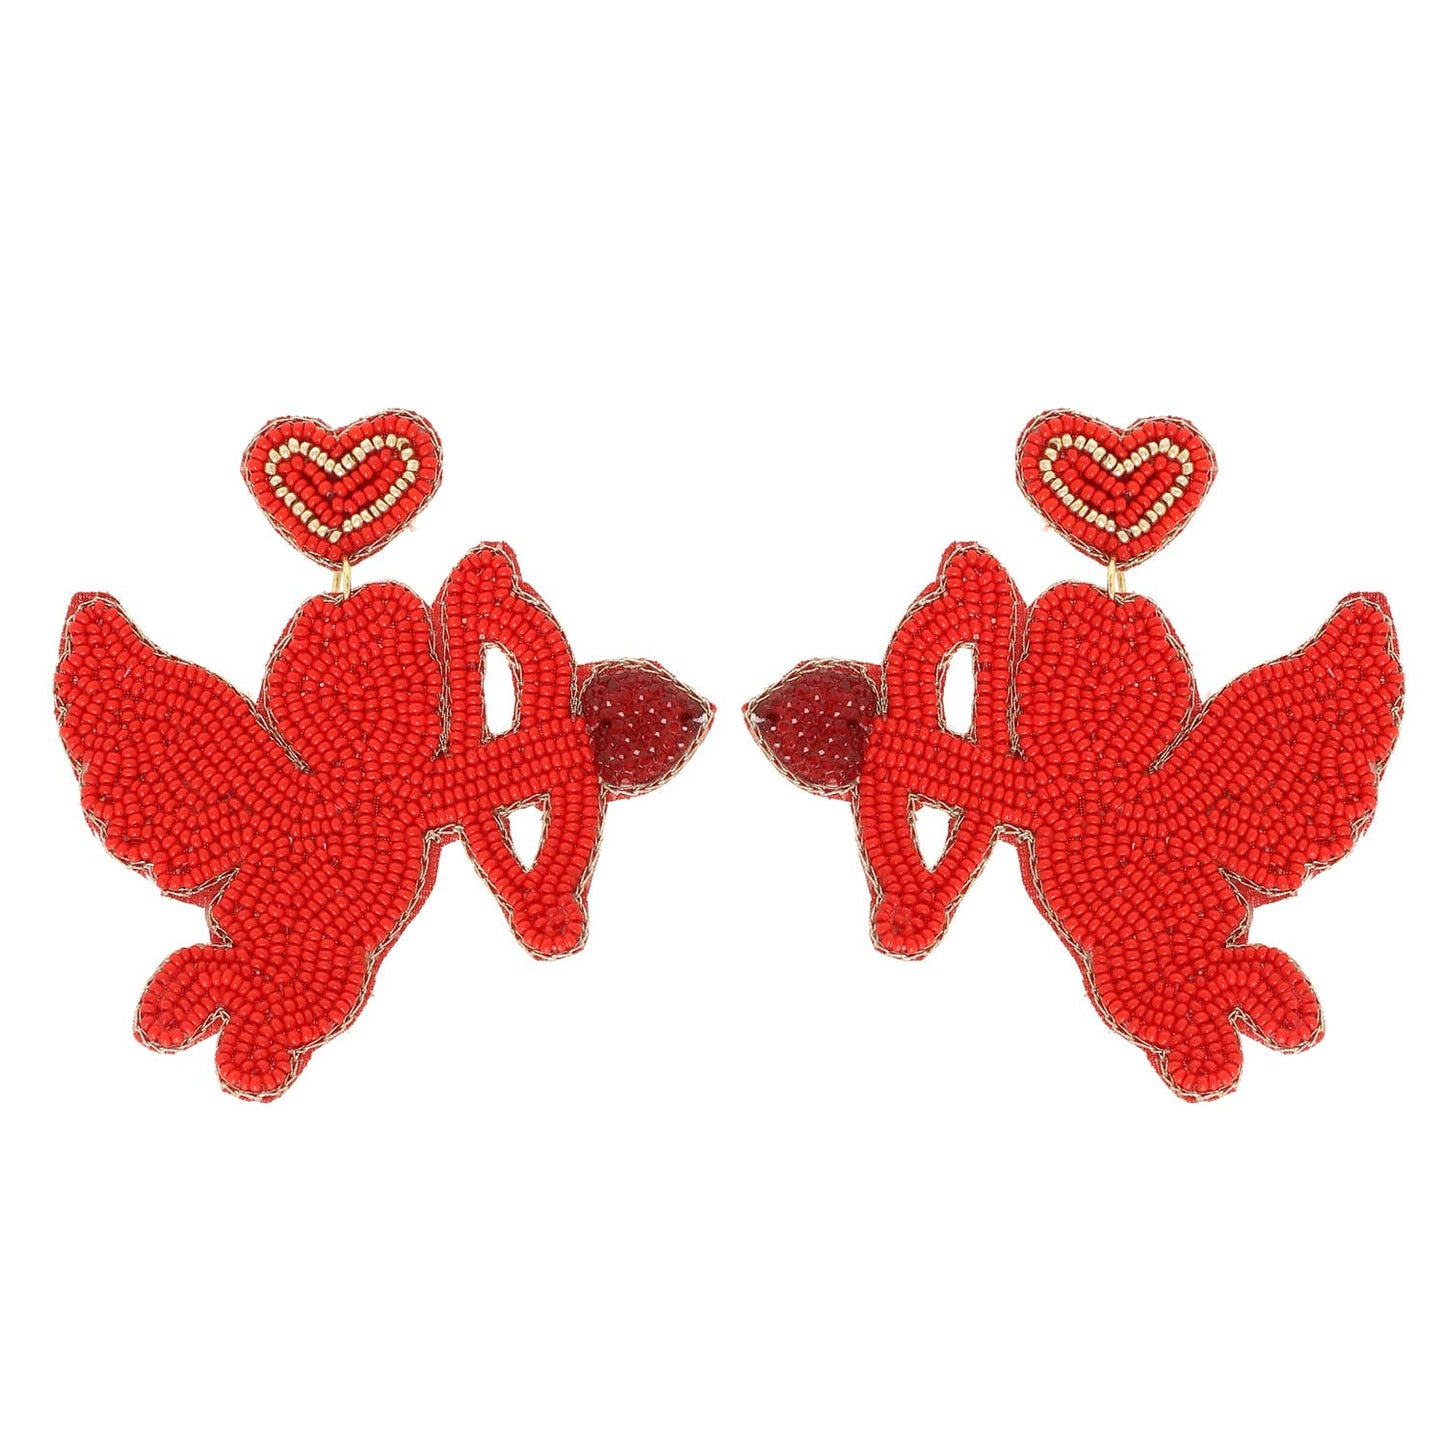 Cupid Valentine's Day Beaded Jeweled Earrings: Pink